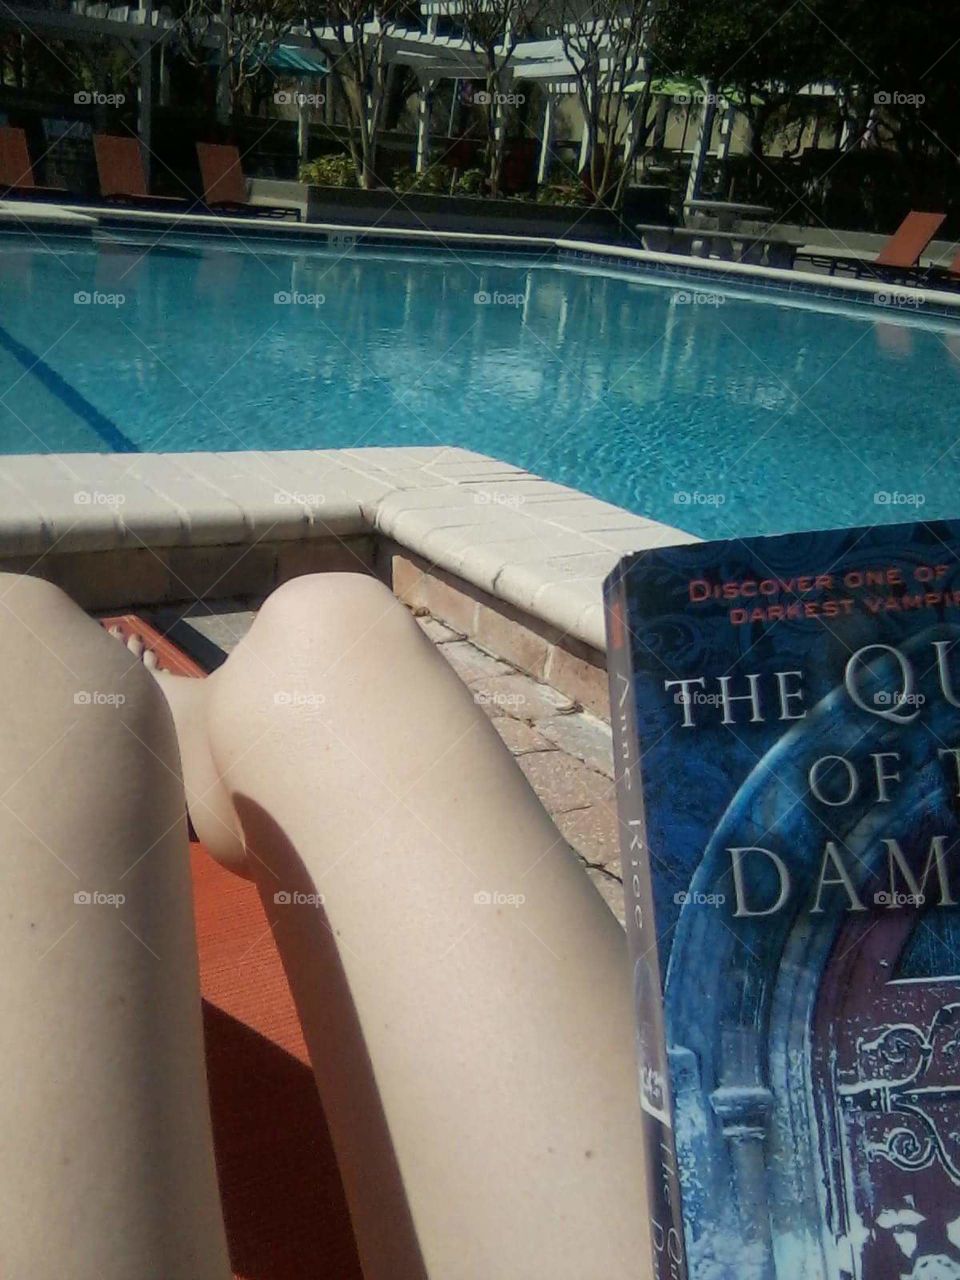 At the pool with a good book